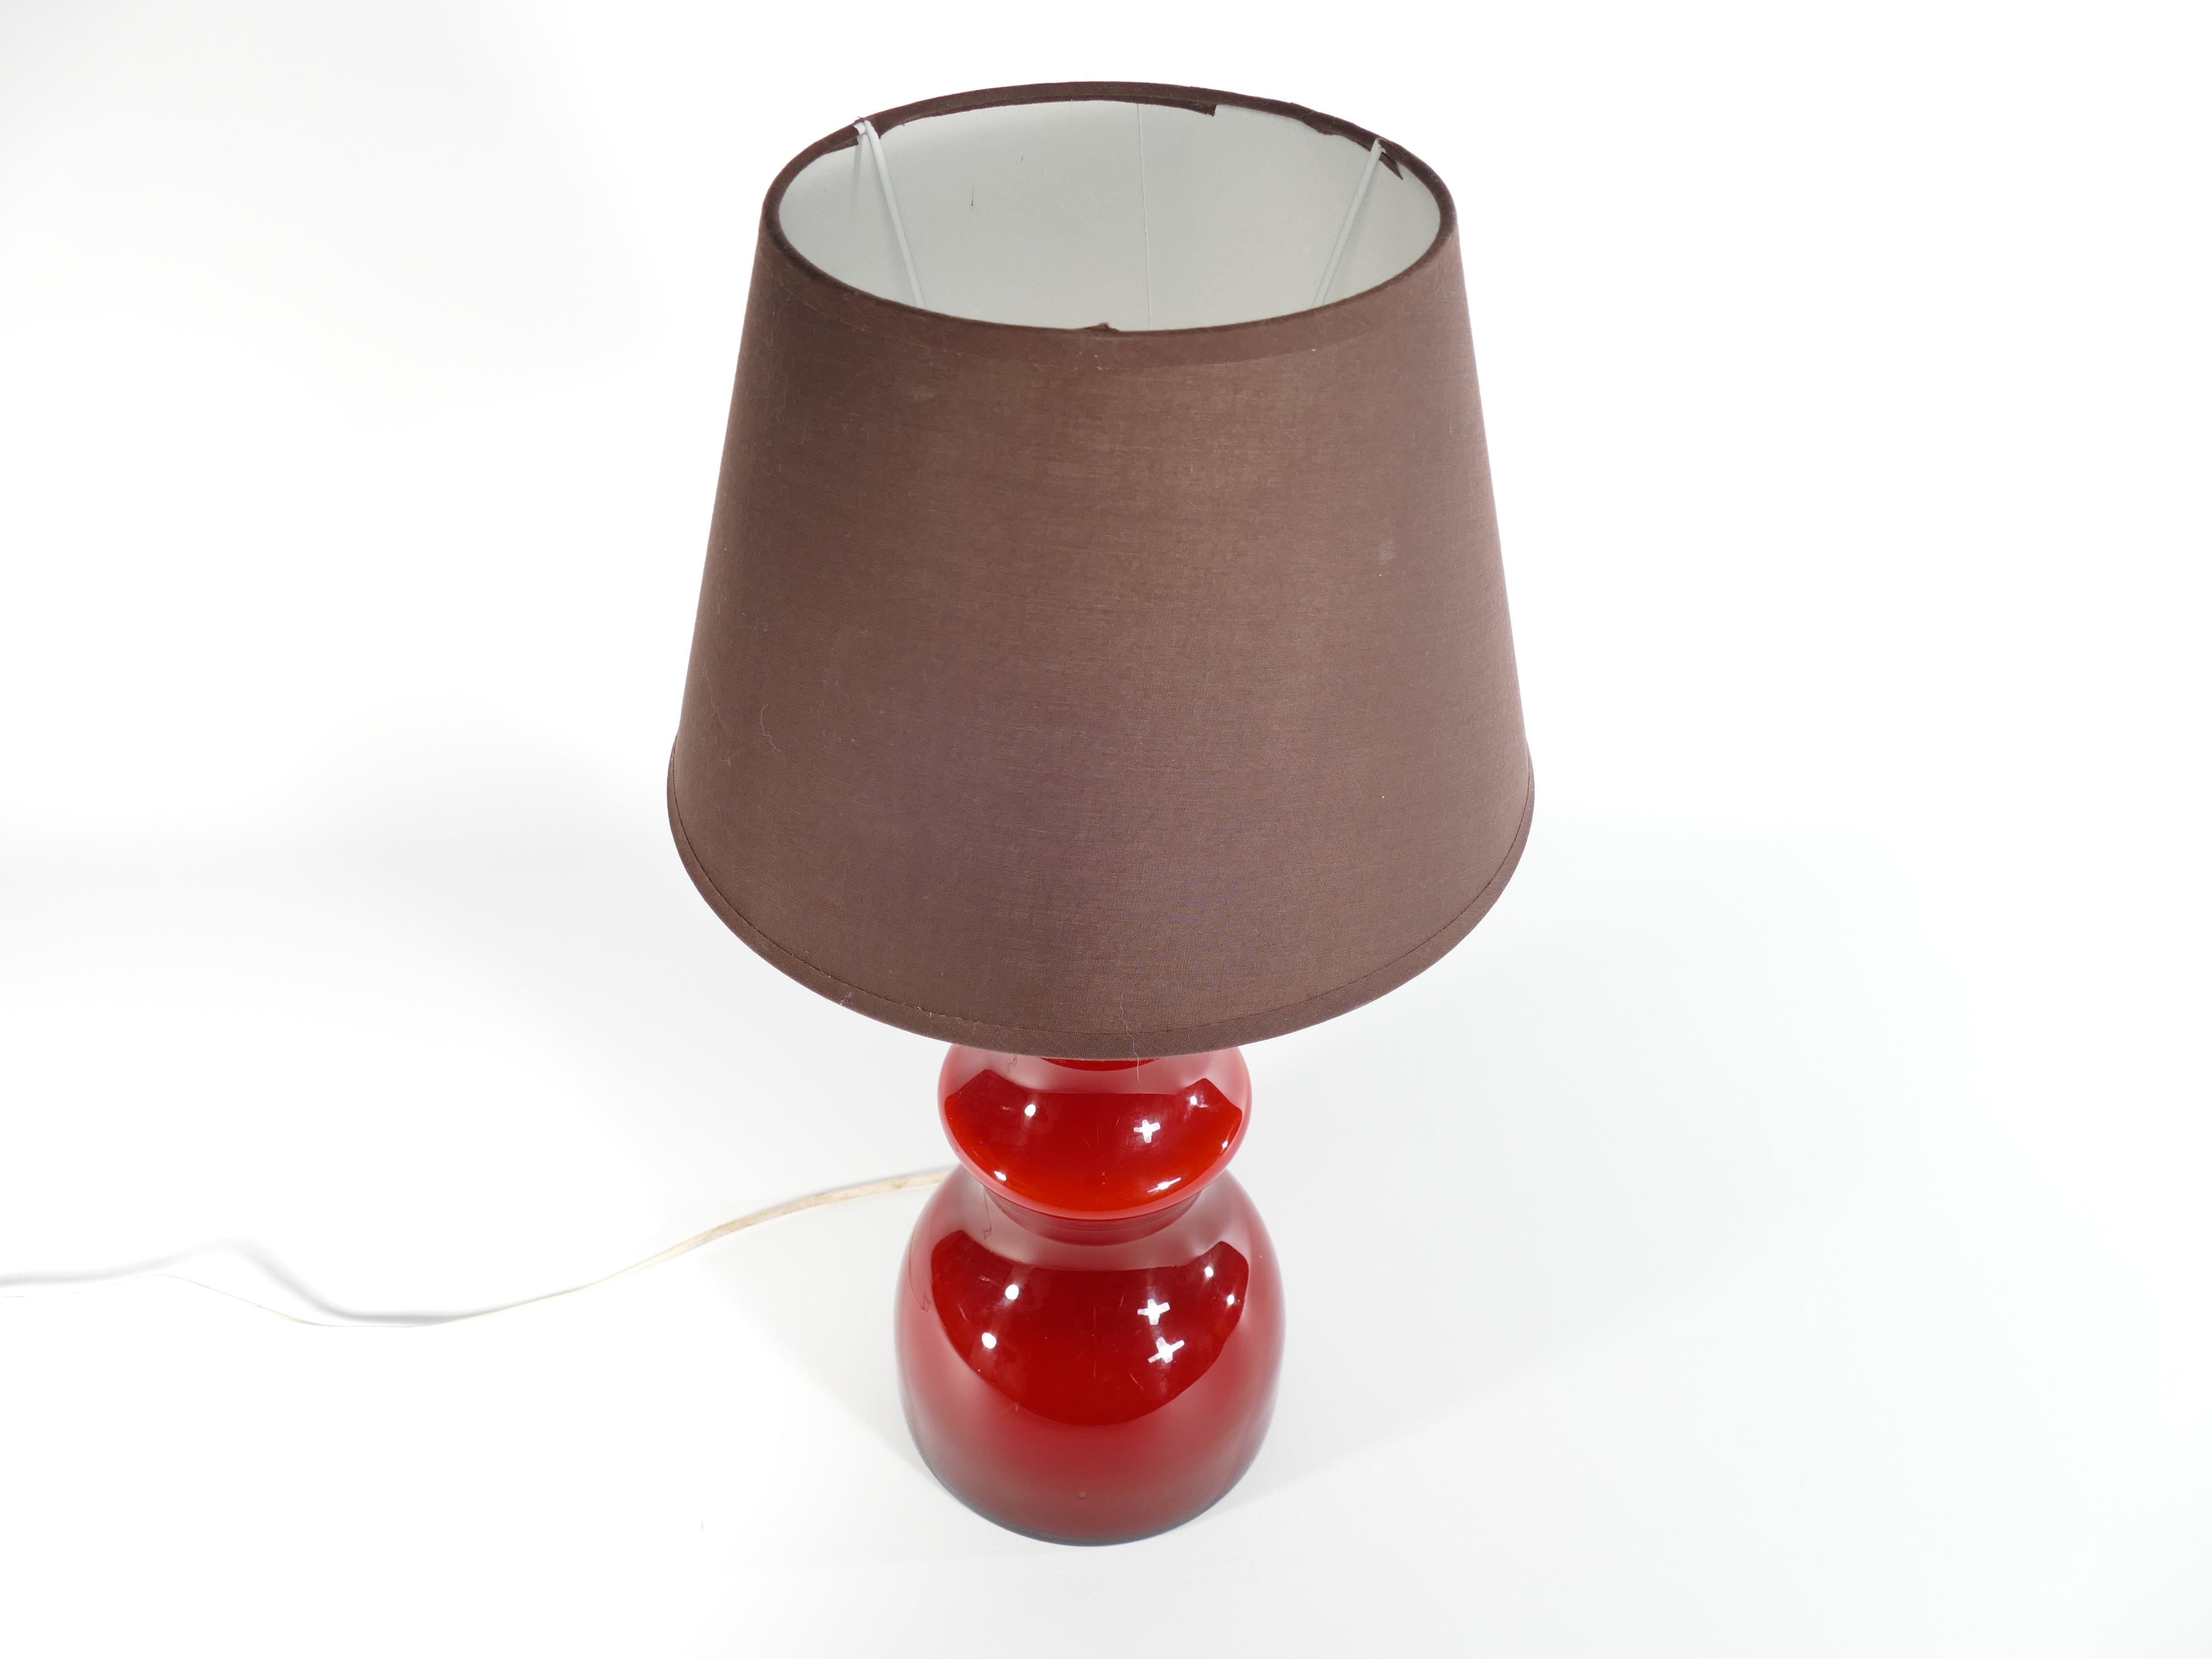 This exceptional opaline oxblood red table lamp by Gert Nyström for Hyllinge Glasbruk, Sweden, is not just a source of light; it's a statement of sophistication and timeless beauty.  

The lamp's exquisite opaline glass shade in a rich oxblood red